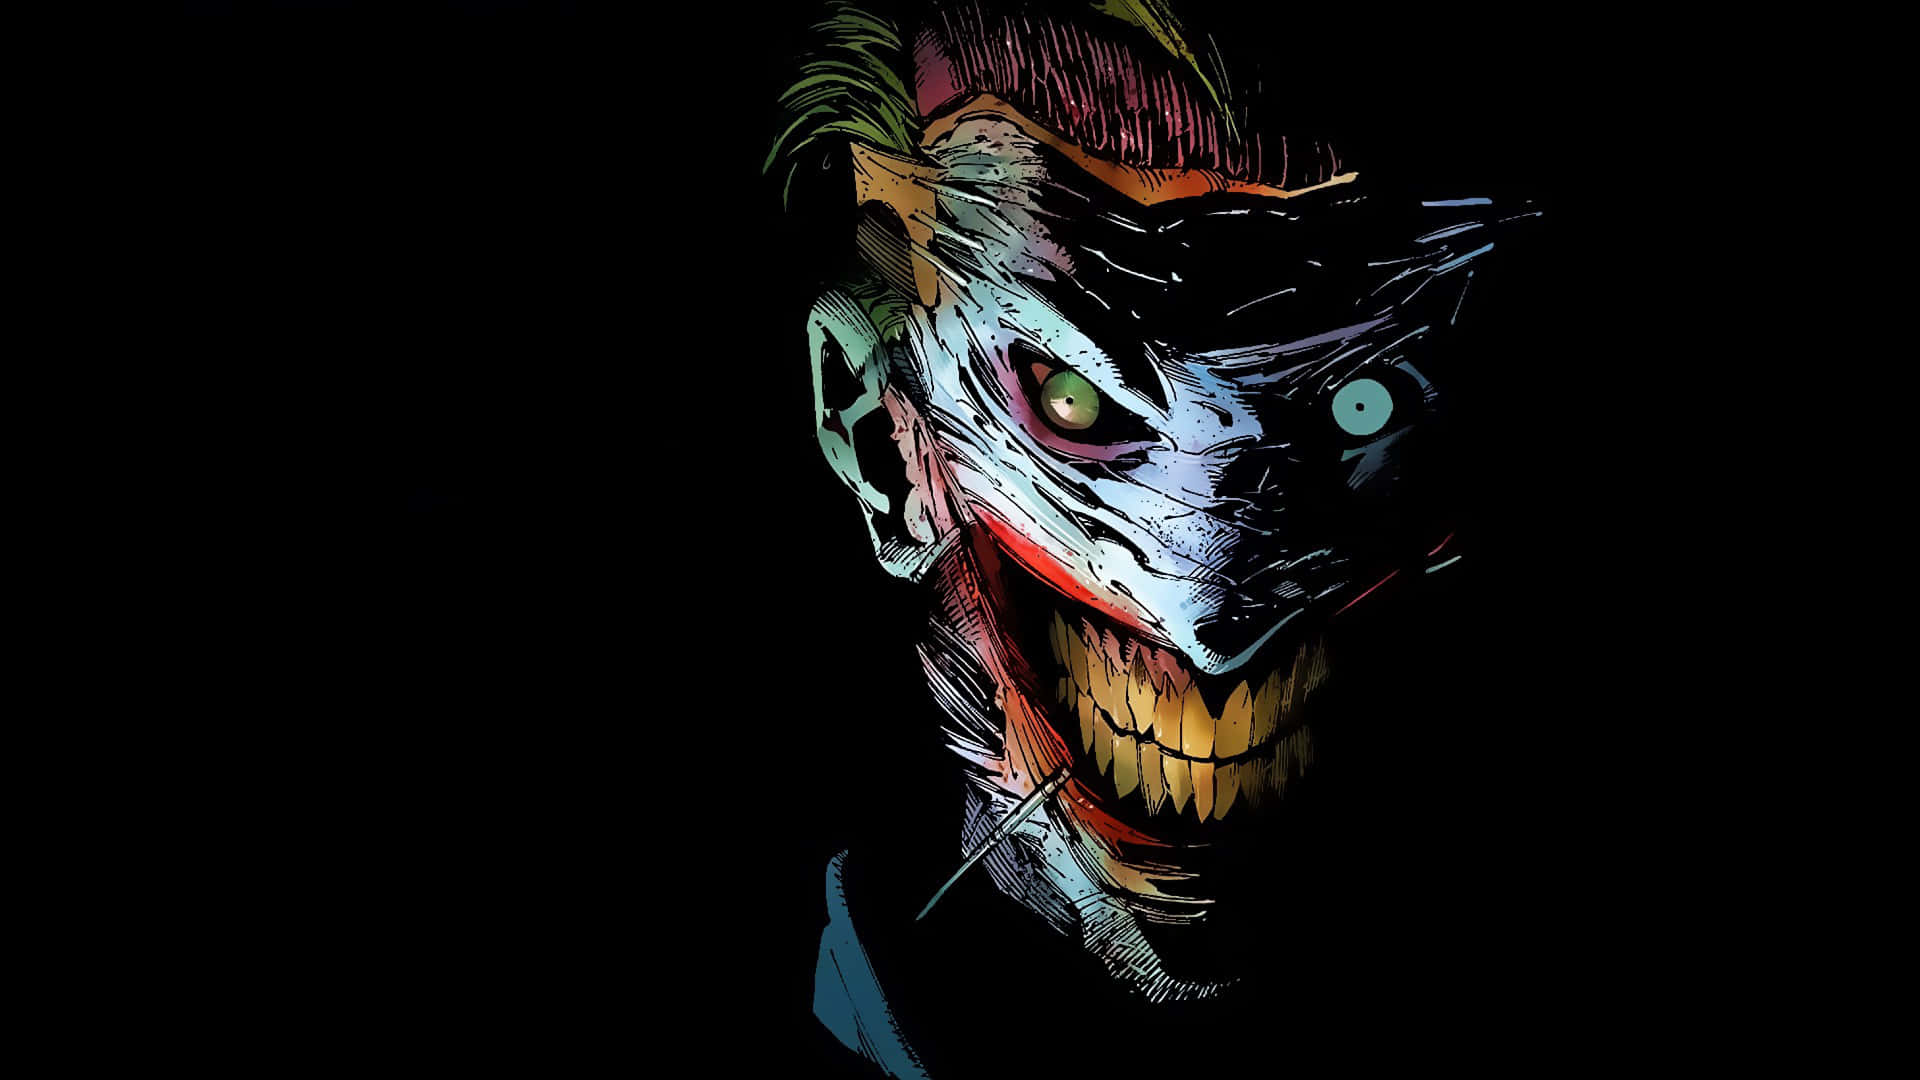 The Clown Prince of Crime - The Joker in all his Marvelous Comic Book Glory Wallpaper